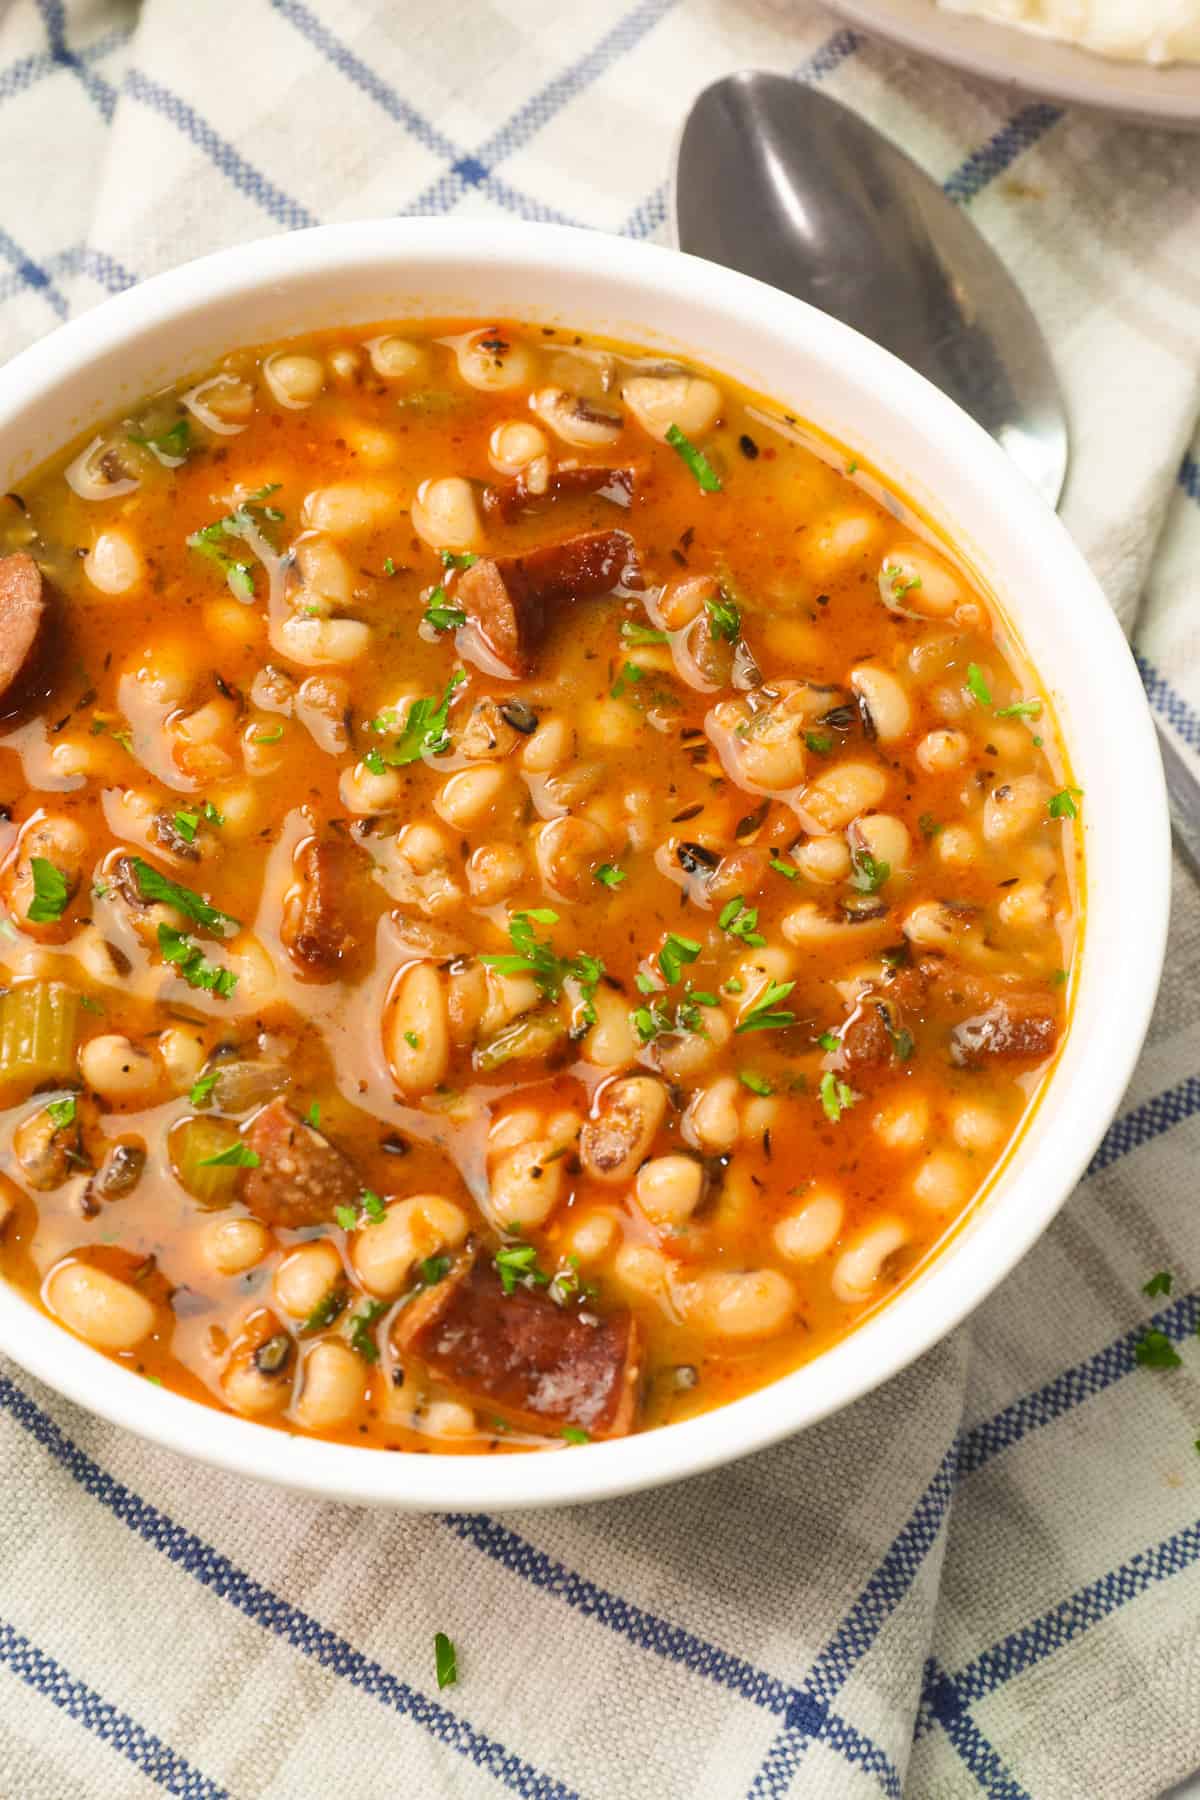 How to Cook Black Eyed Peas in a Slow Cooker • The Simple Parent